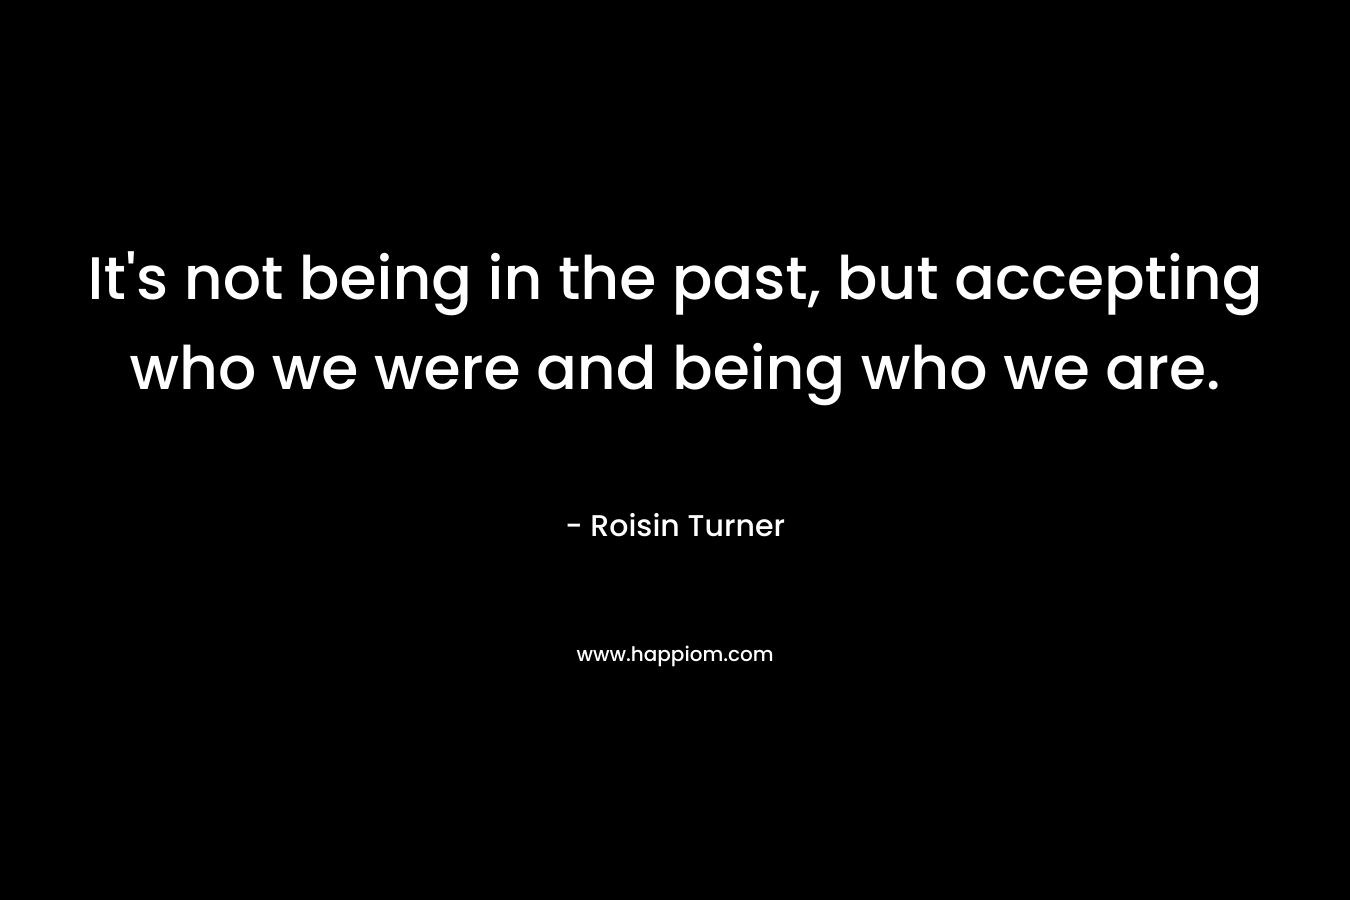 It’s not being in the past, but accepting who we were and being who we are. – Roisin Turner